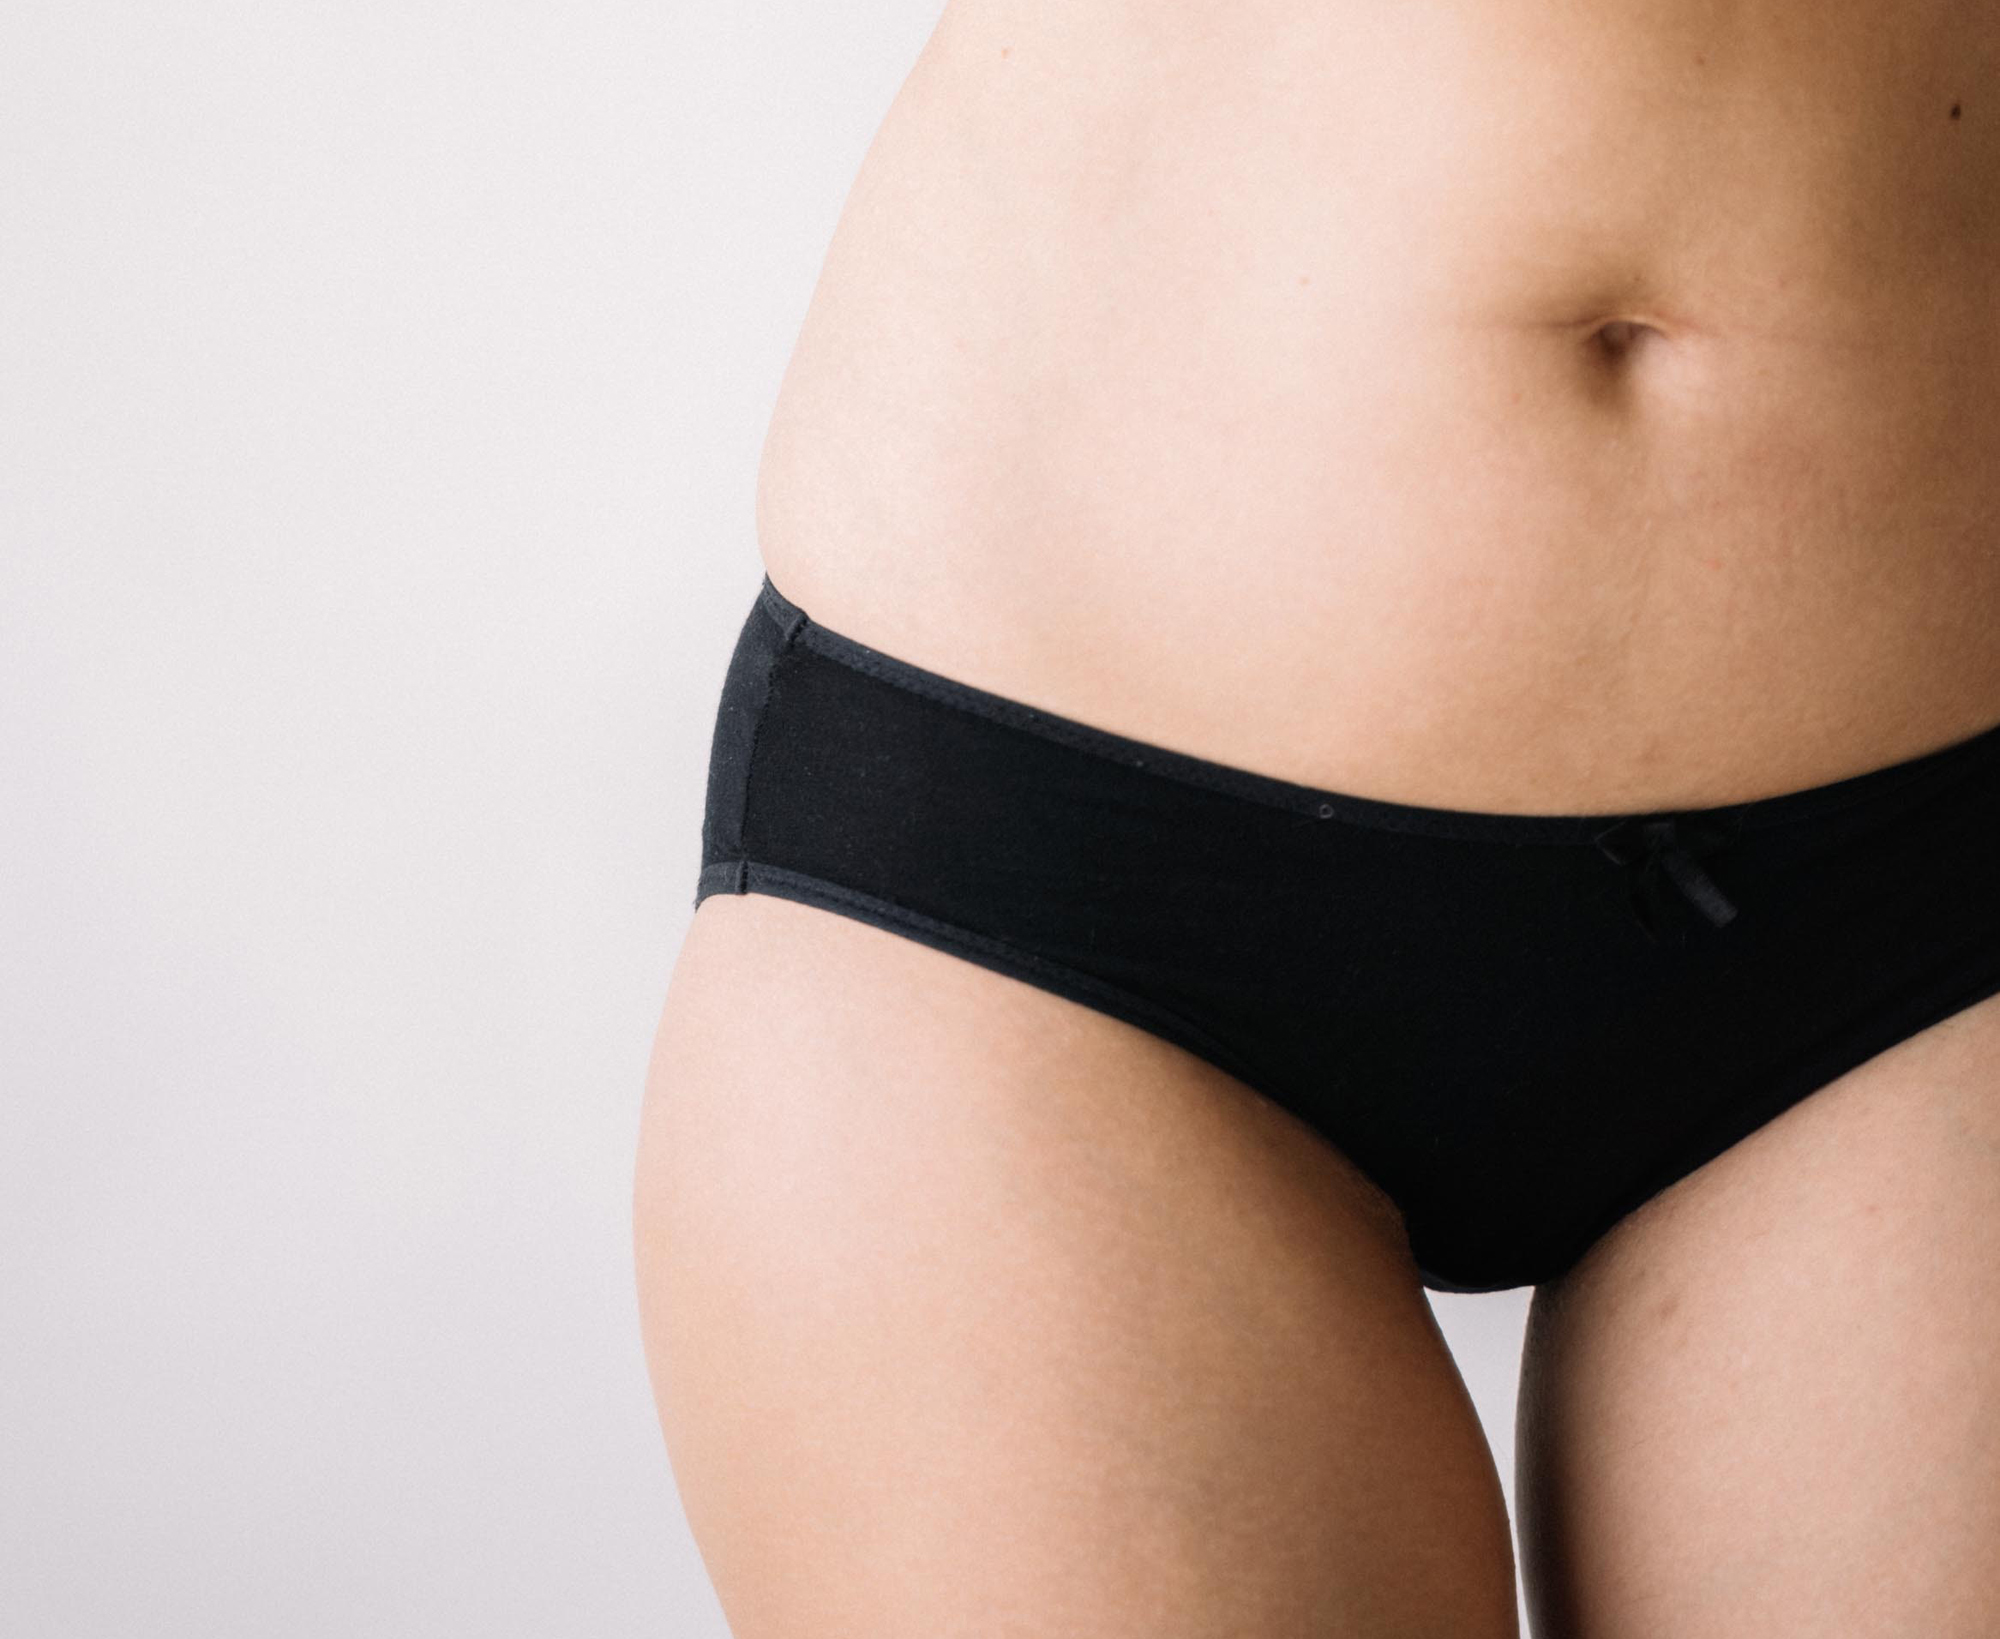 Do you have a Fatty Upper Pubic Area (FUPA)? CoolSculpting might